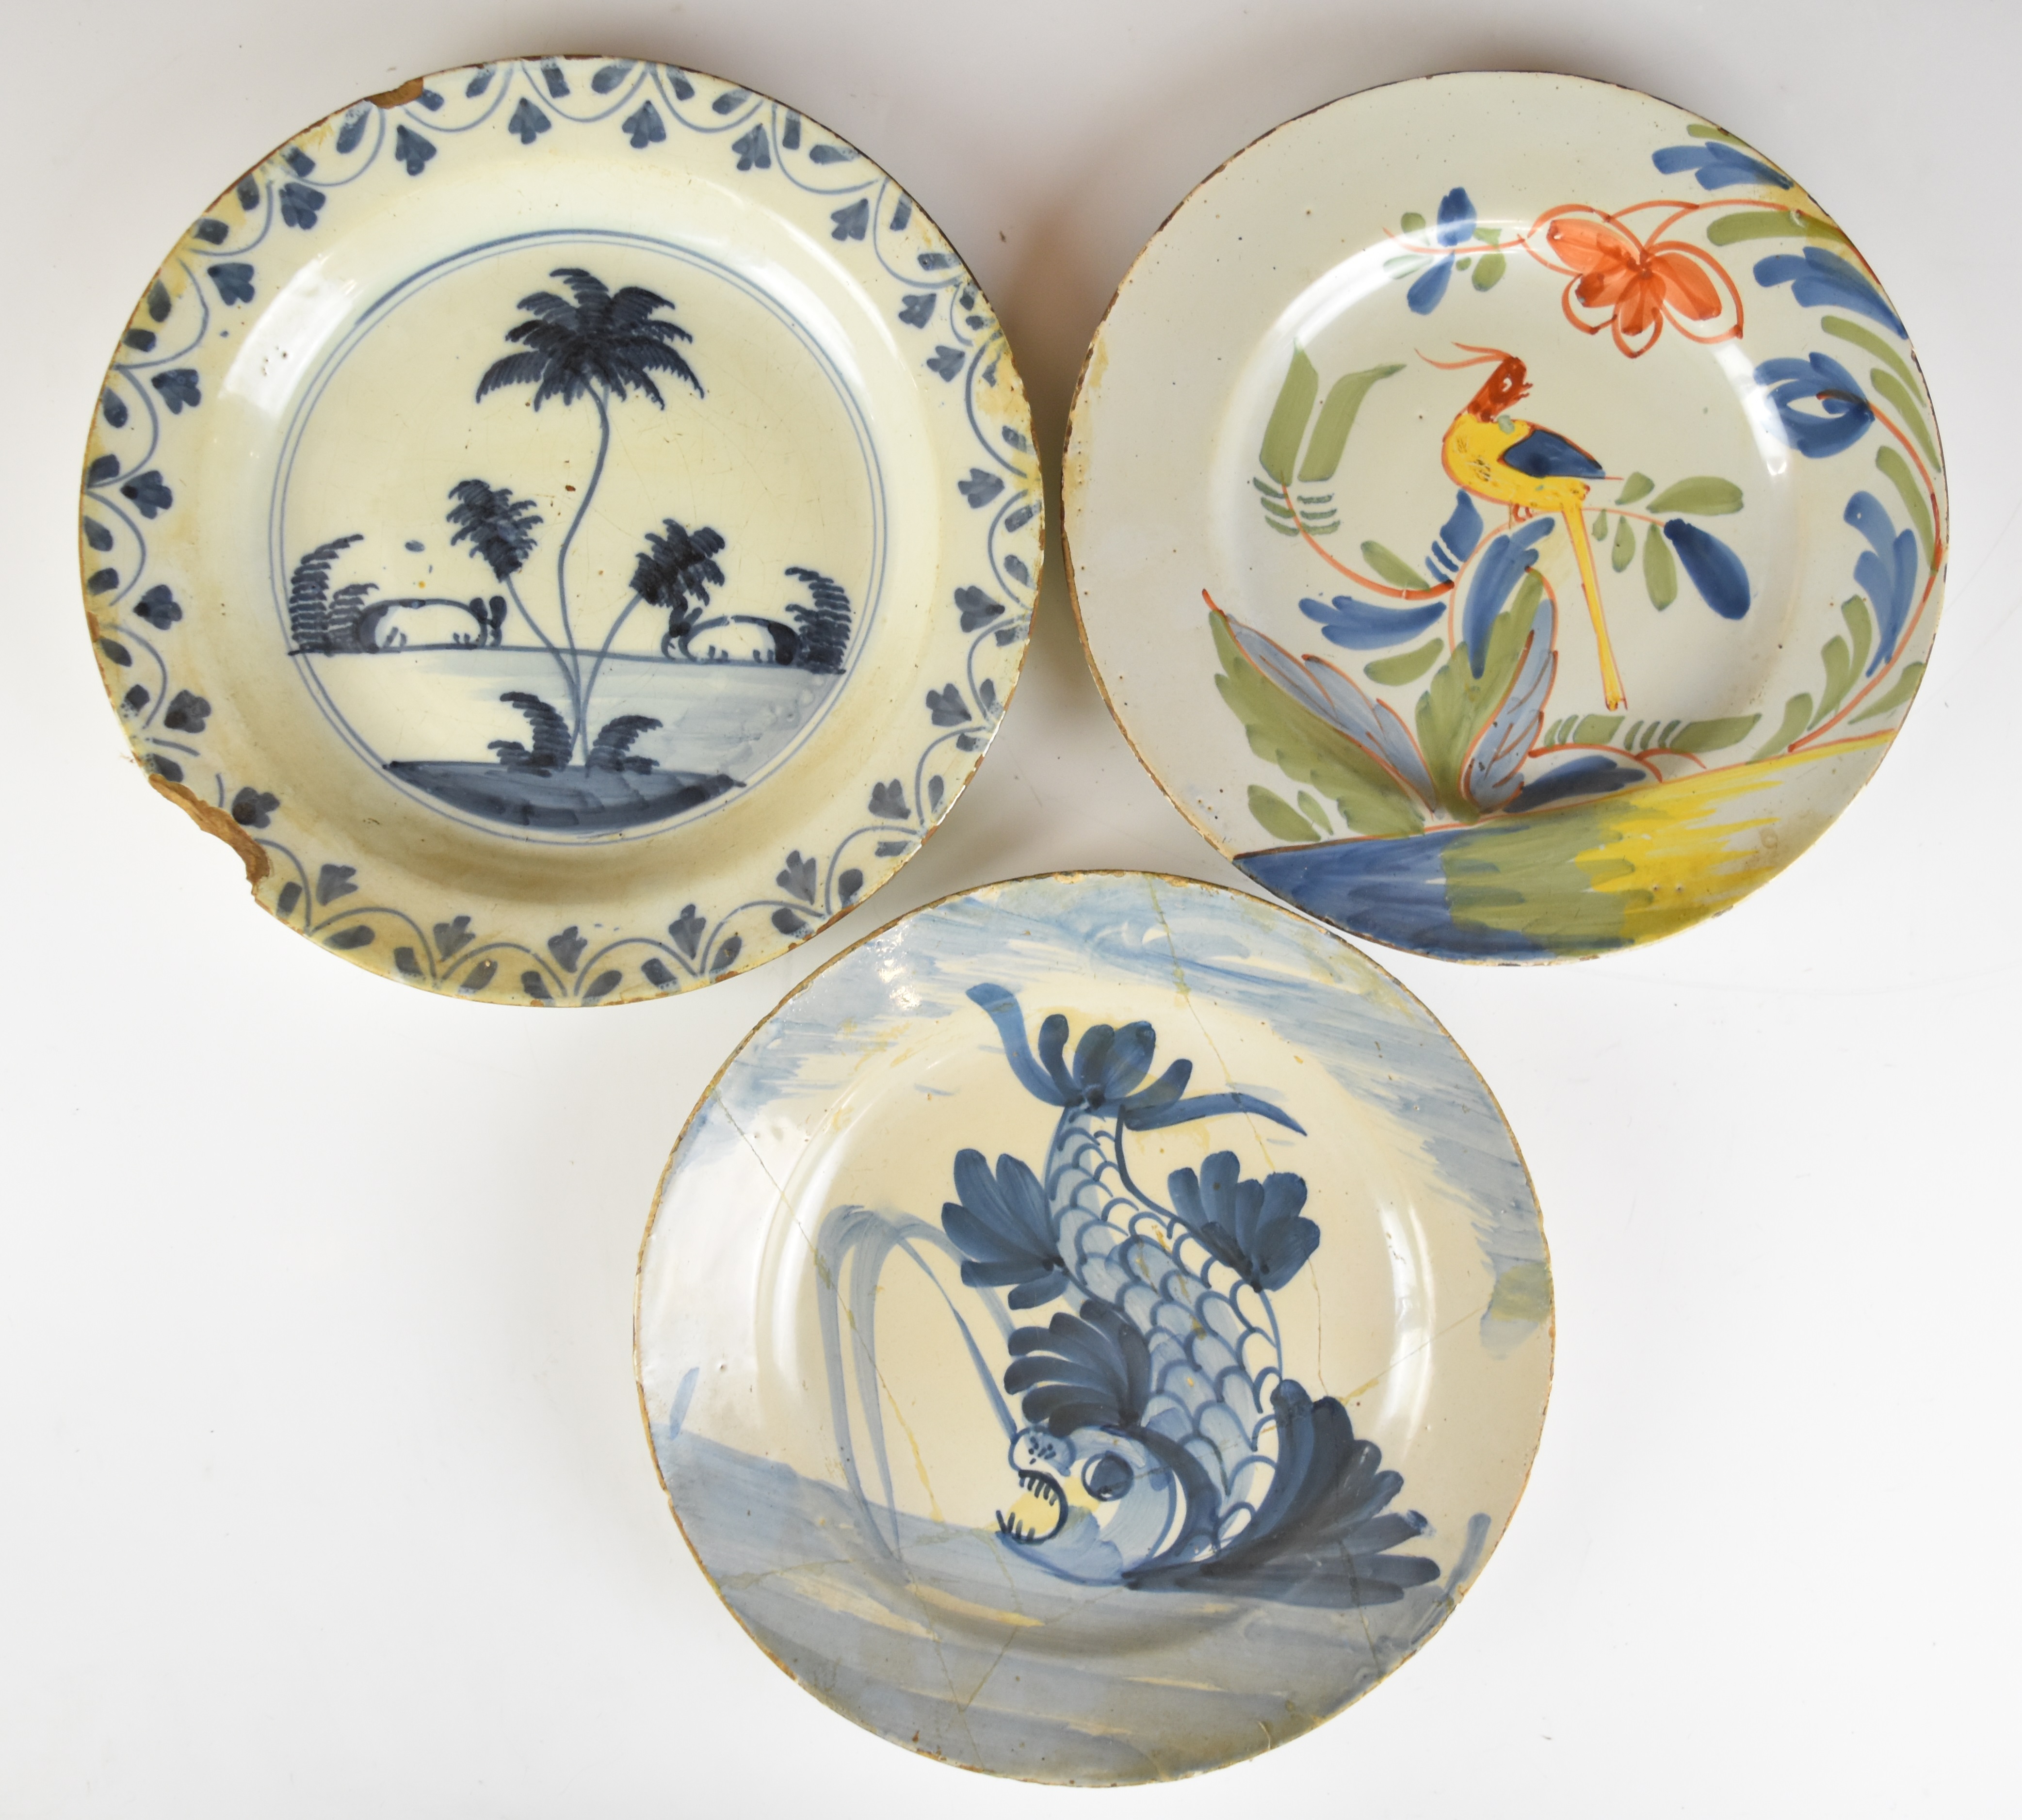 Three 18thC Delft plates including a polychrome example with exotic bird decoration, largest